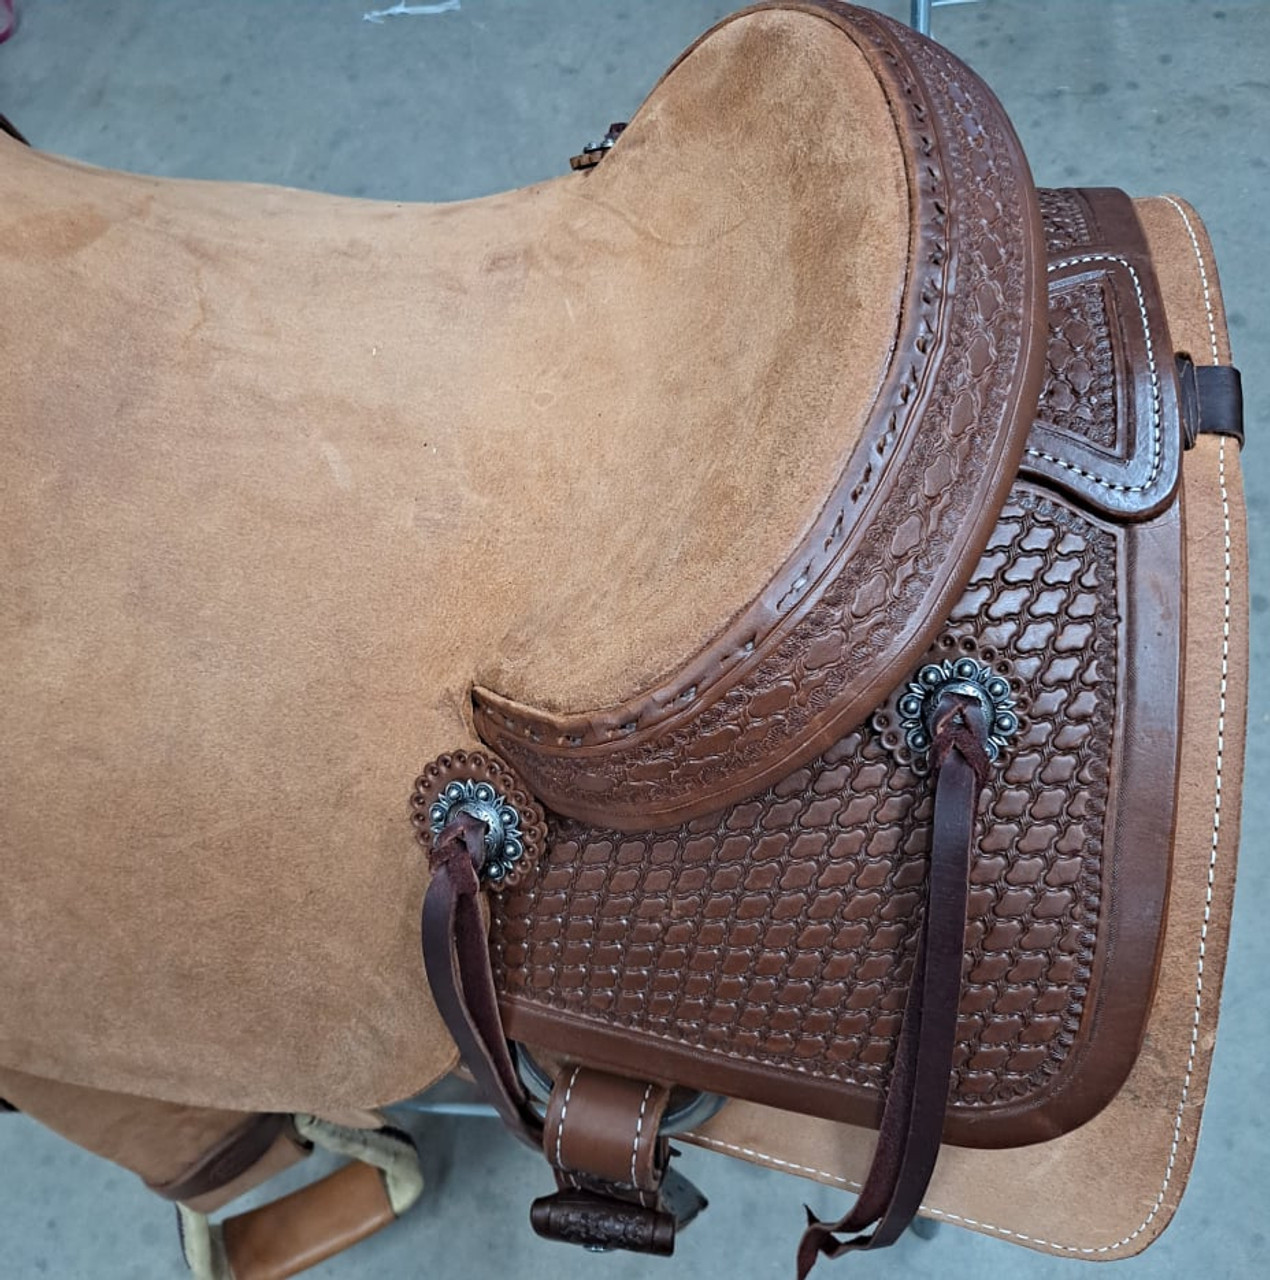 New Cutting Saddle by Fort Worth Saddle Co with 16 inch seat. Hermann Oak leather. Roughout contact points and skirt. Hand tooled rear chassis, cantle, and pommel. Gullet size is 7.25 inch, weight is 36lbs, and skirt is 28.5 inch. Made in USA. Limited lifetime warranty.

S1492